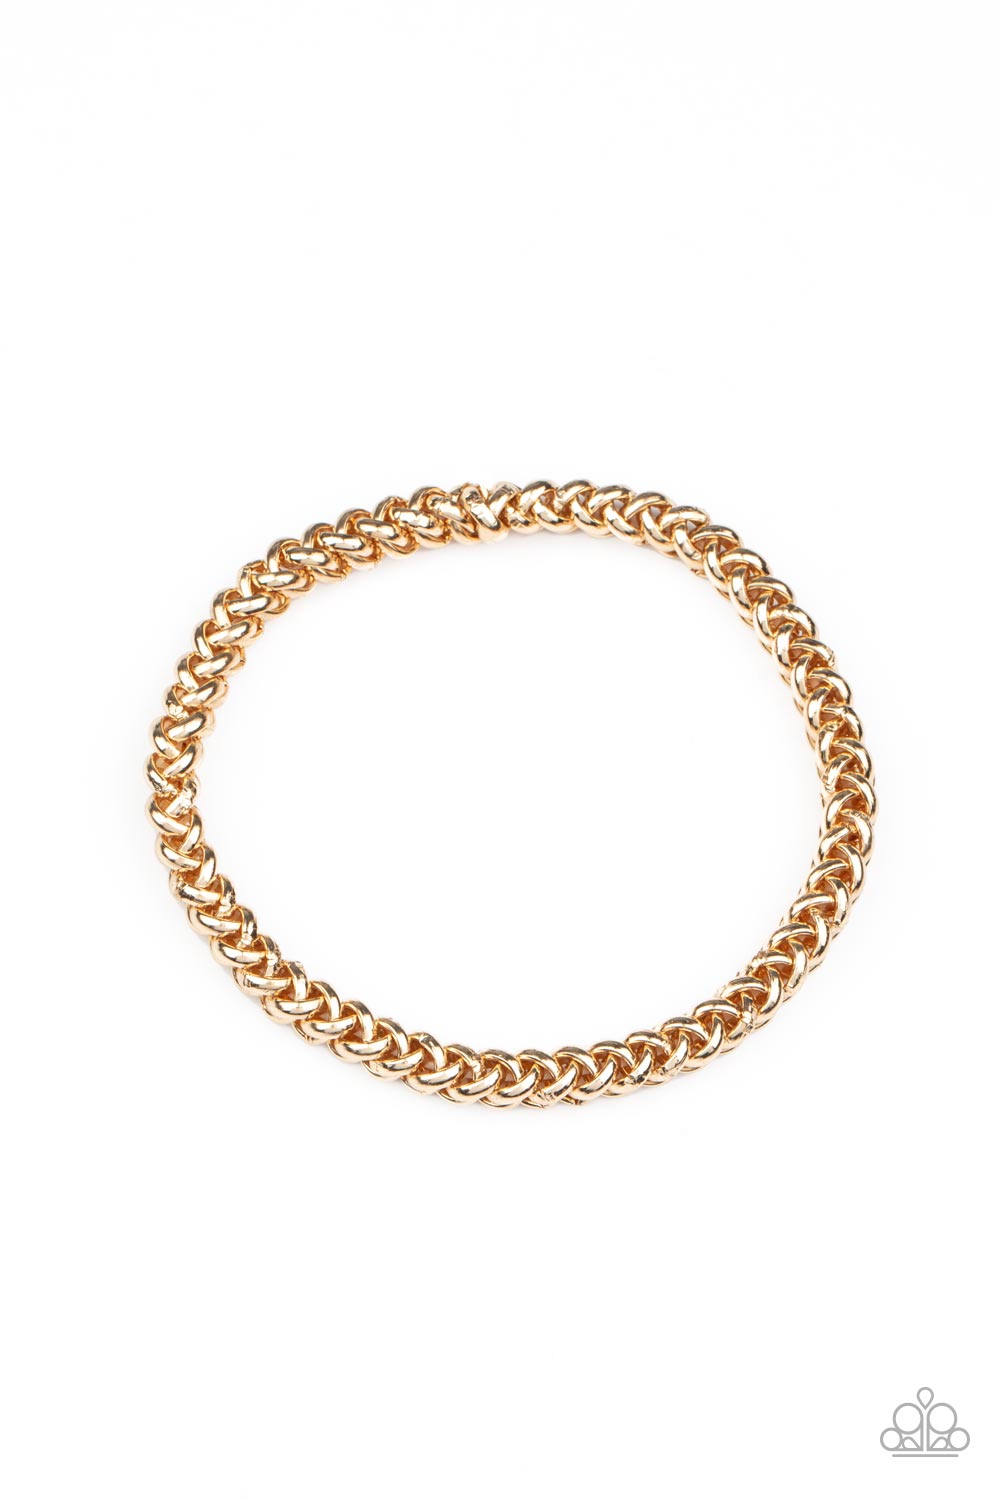 Setting The Pace Gold Unisex Stretch Bracelet - Paparazzi Accessories  Featuring round links, a gold chain is threaded along a stretchy band around the wrist for a classic urban look.  Sold as one individual bracelet.